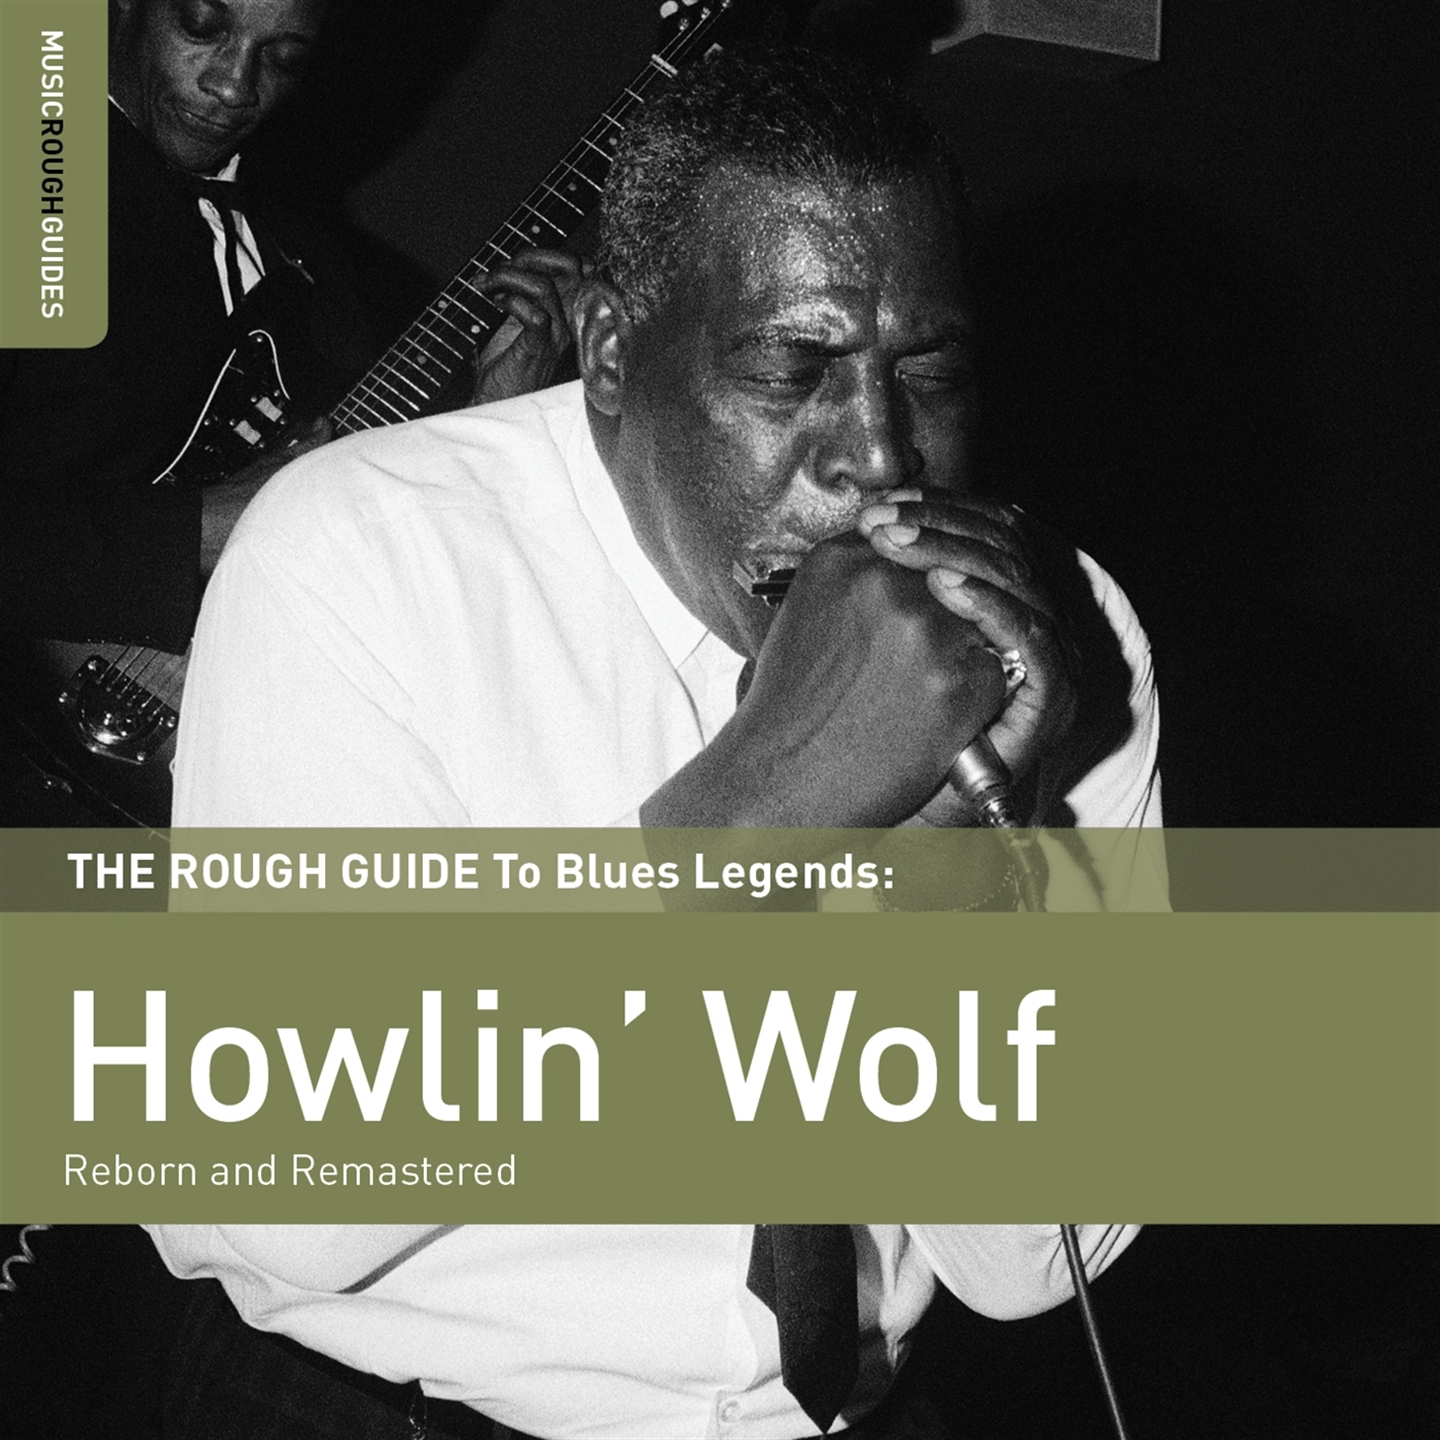 THE ROUGH GUIDE TO BLUES LEGENDS: HOWLIN WOLF